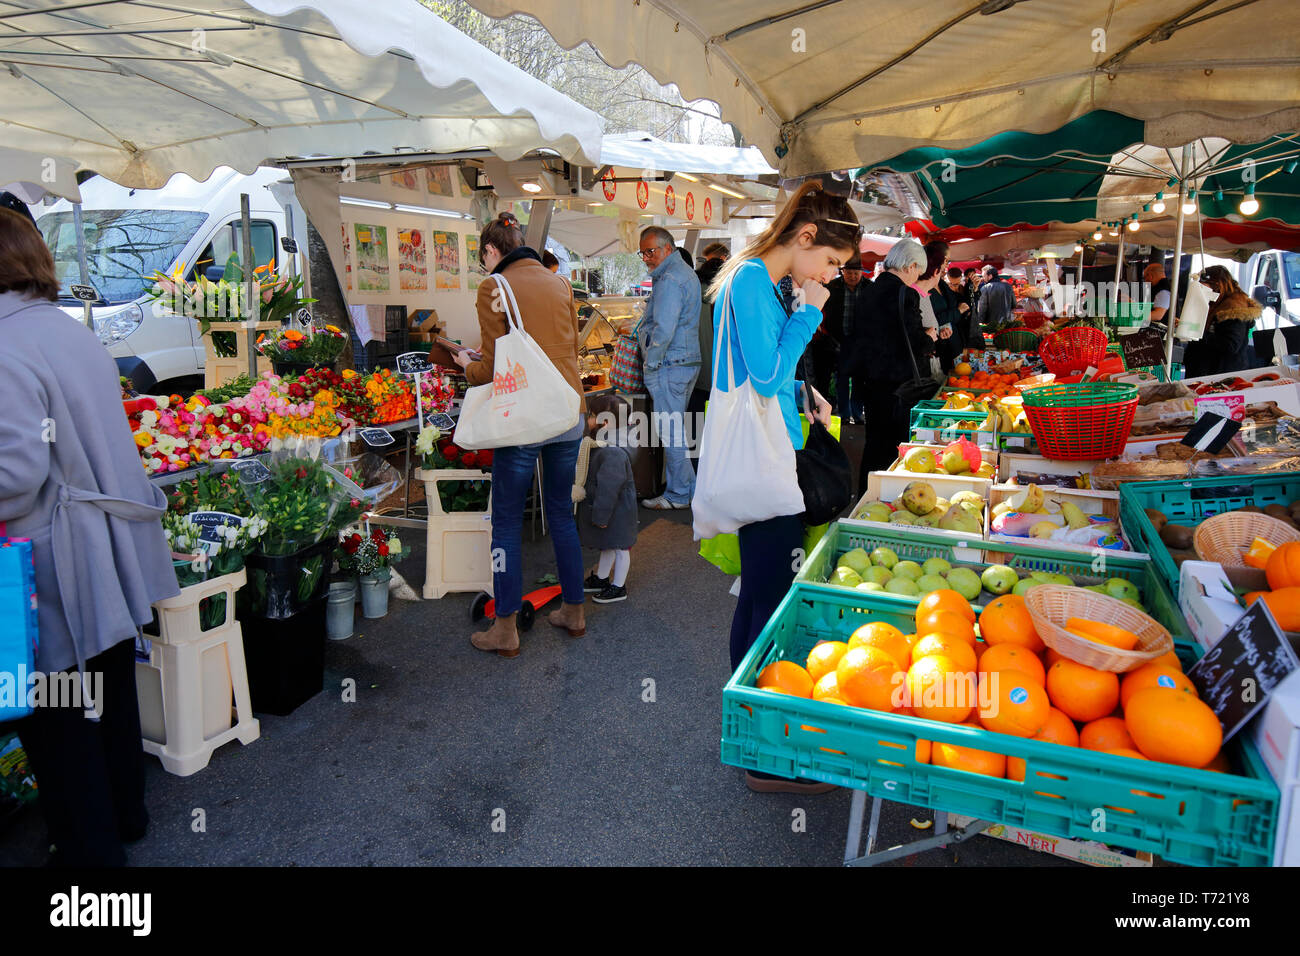 People shopping at the weekend farmers market in Croix Rousse, Lyon, France Stock Photo